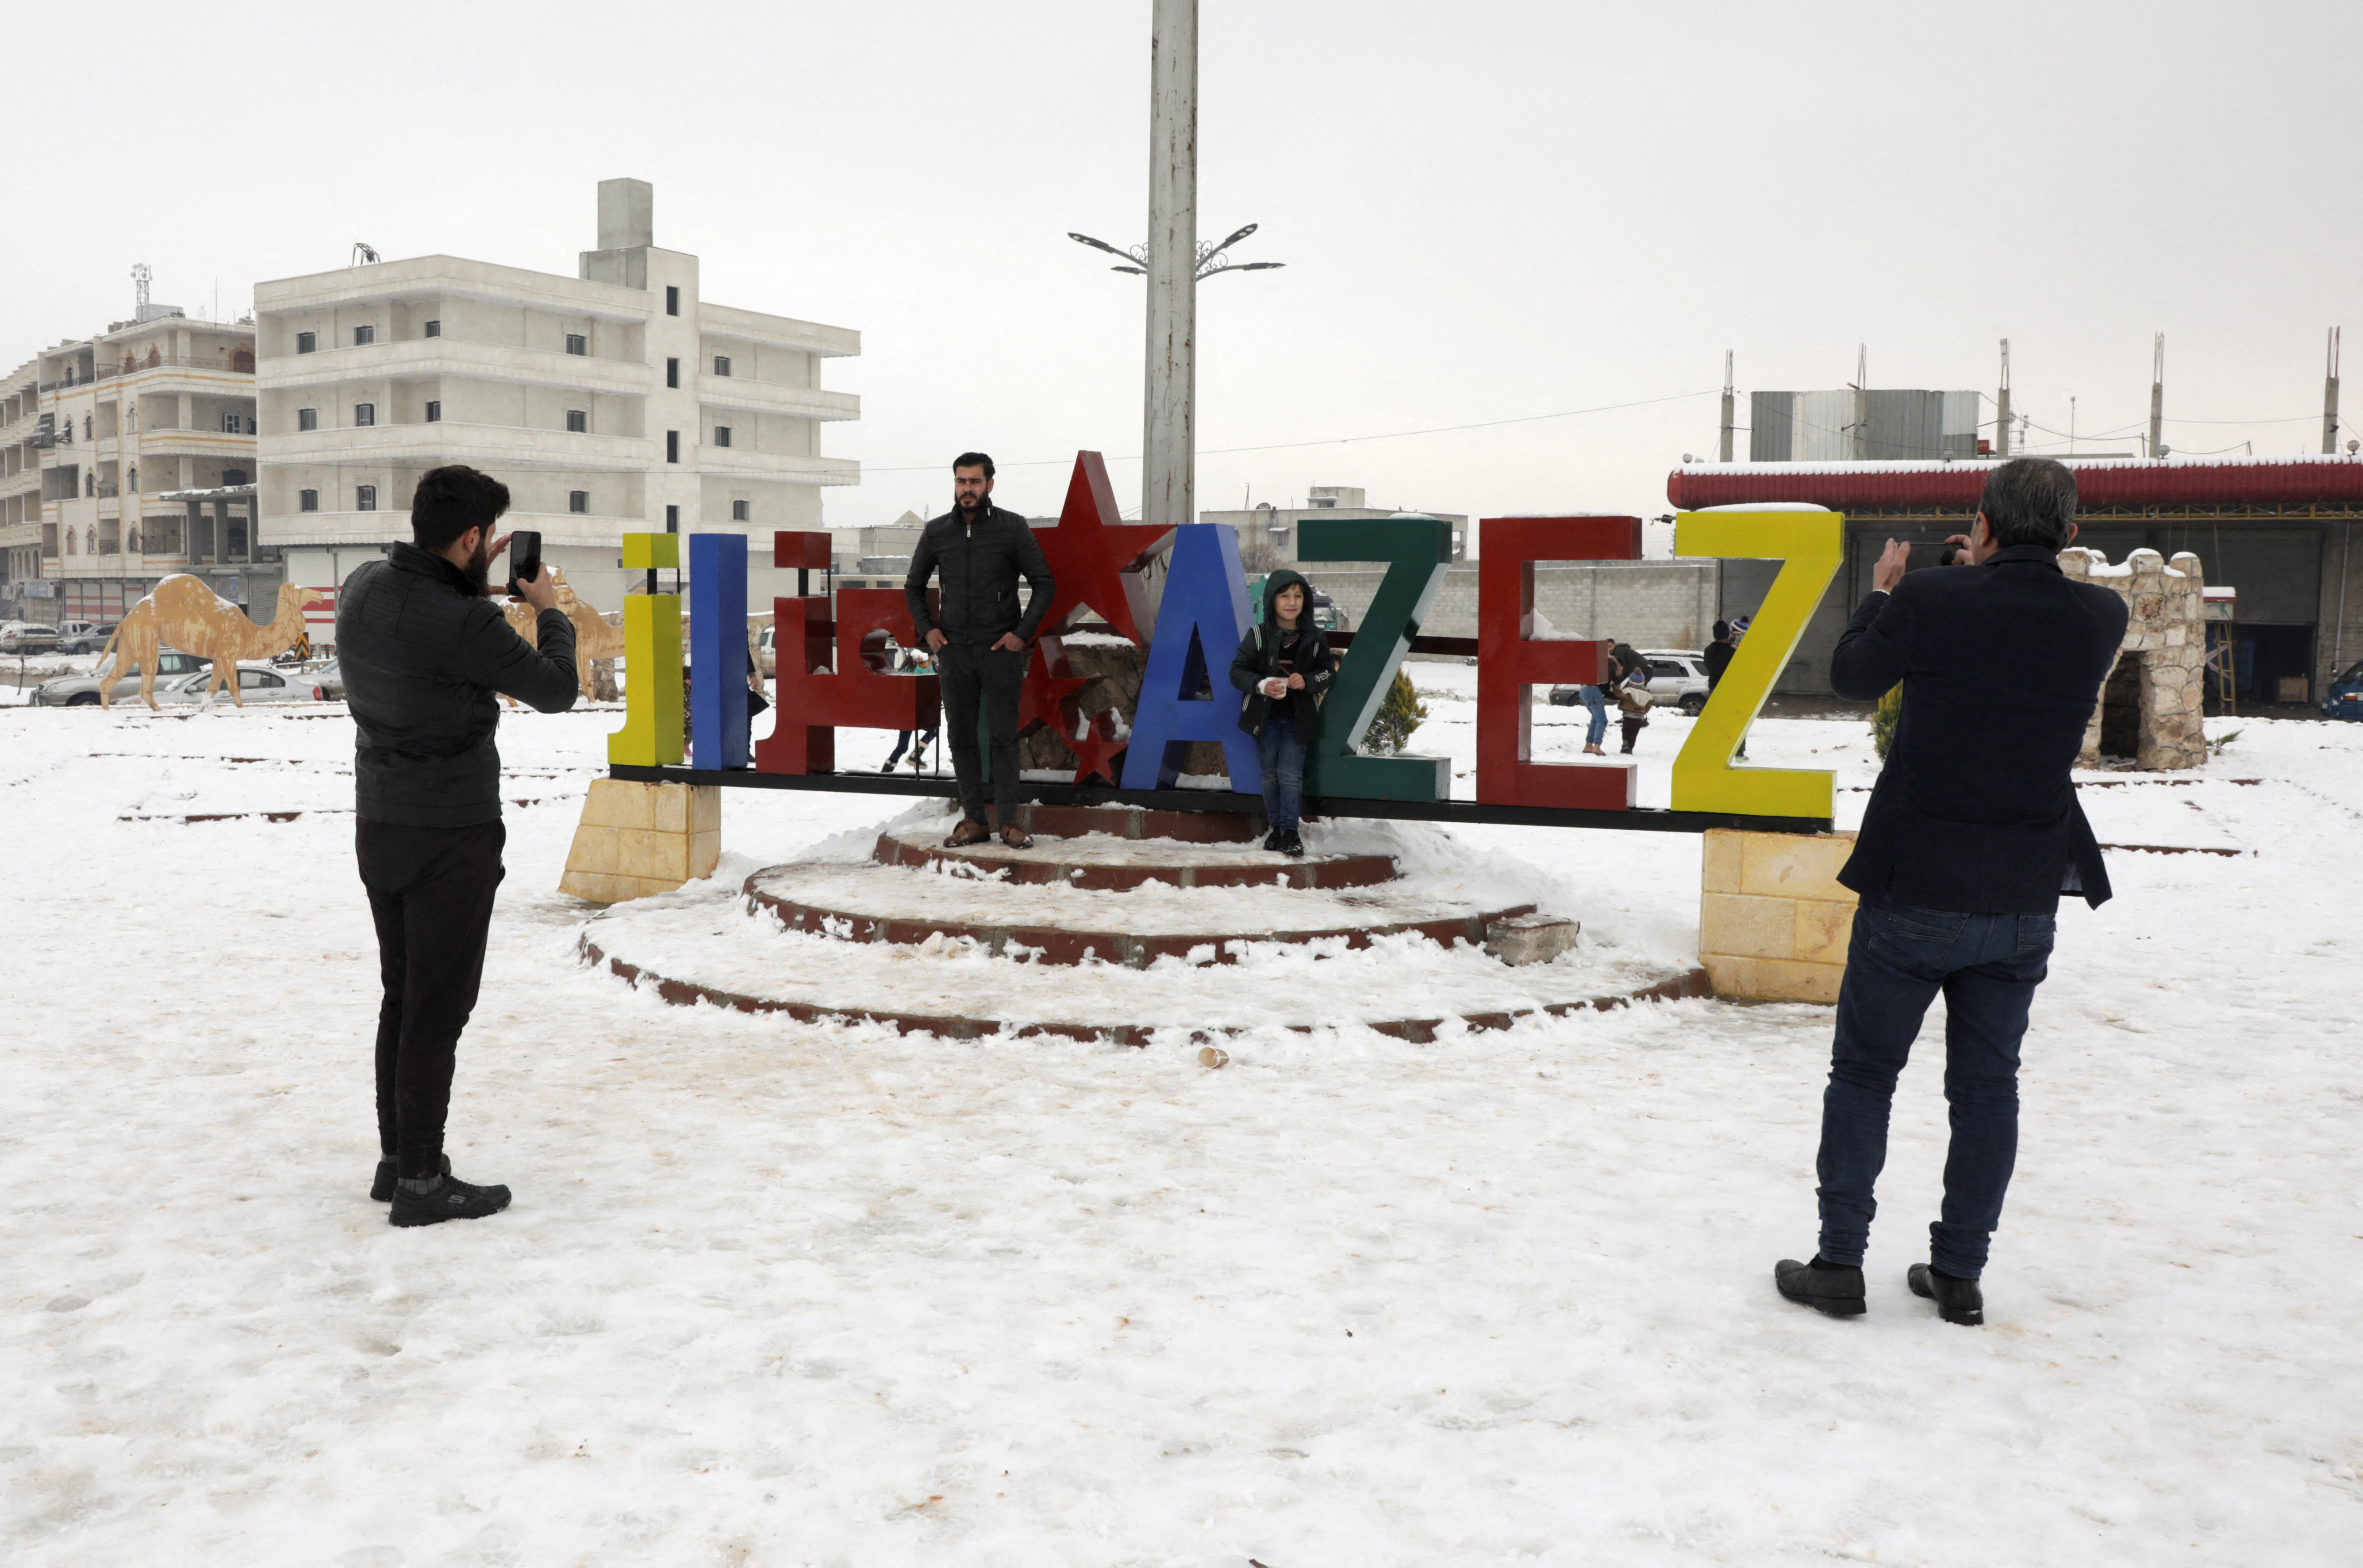 A man uses a mobile phone to take a picture of another man in the snow covered city of Azaz